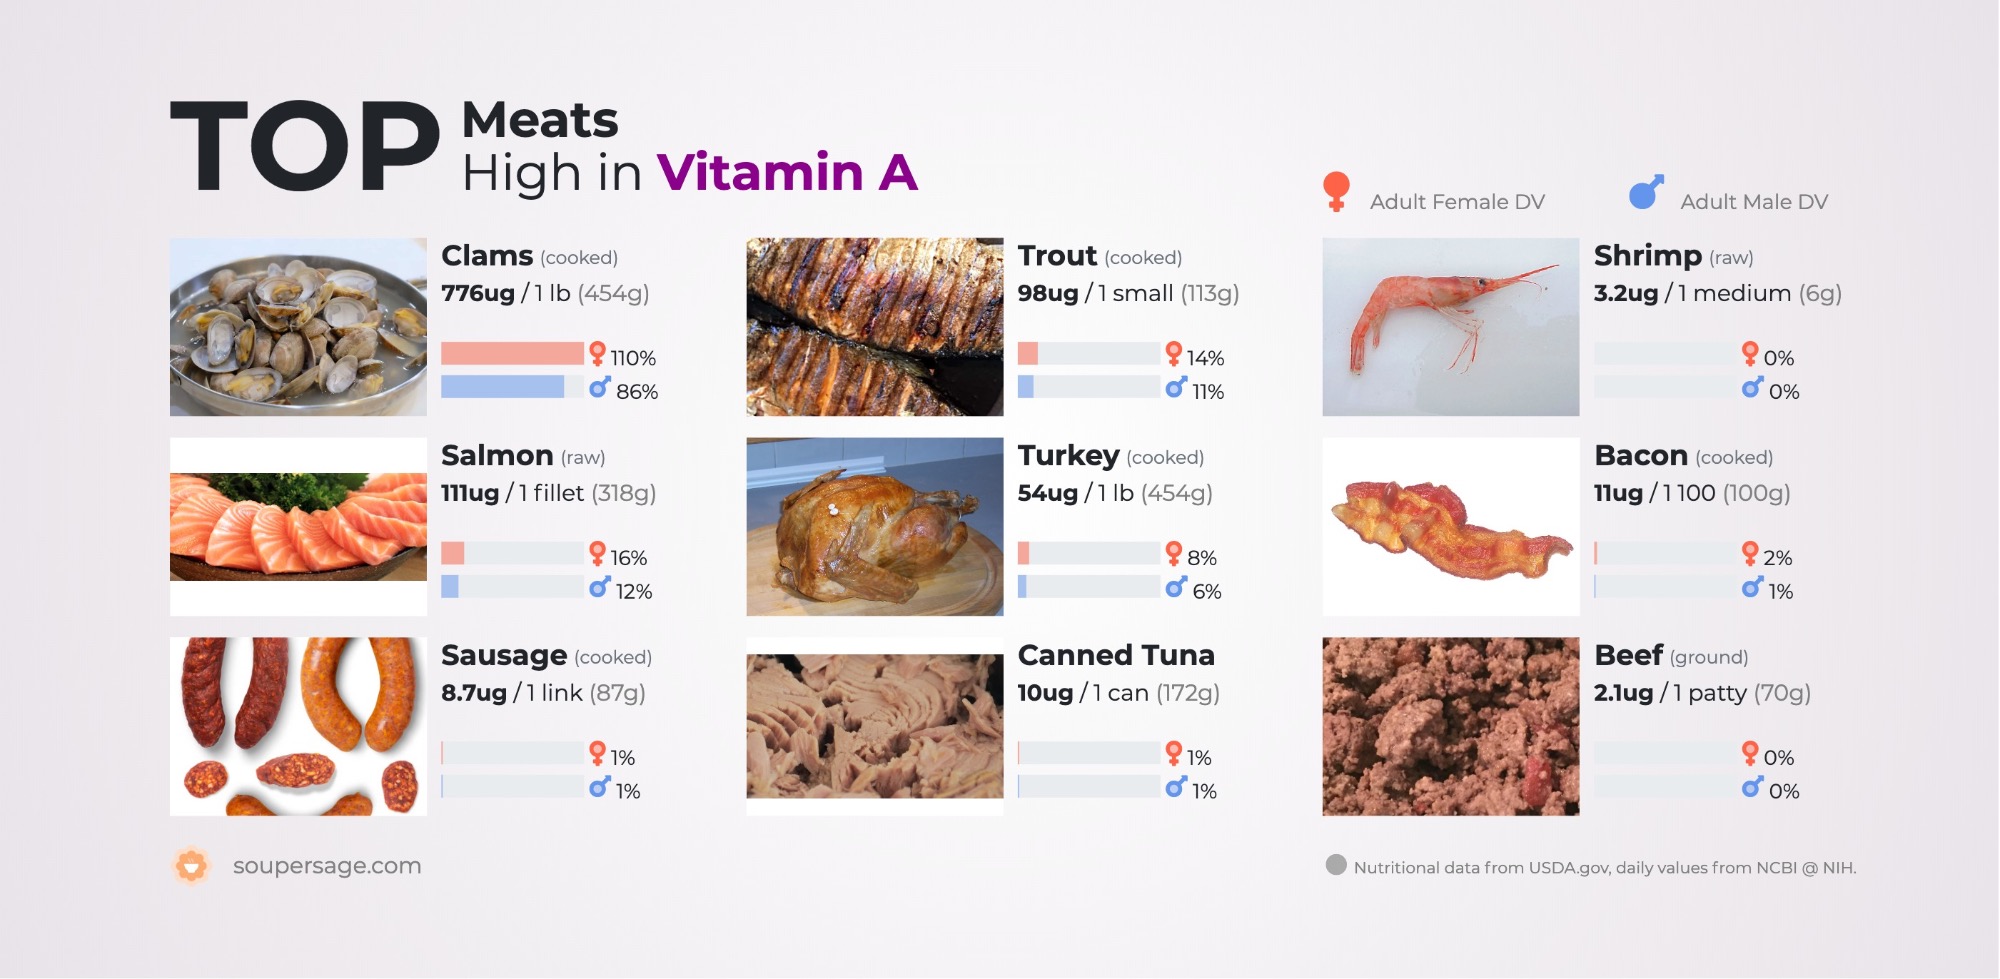 image of Top Meats High in Vitamin A